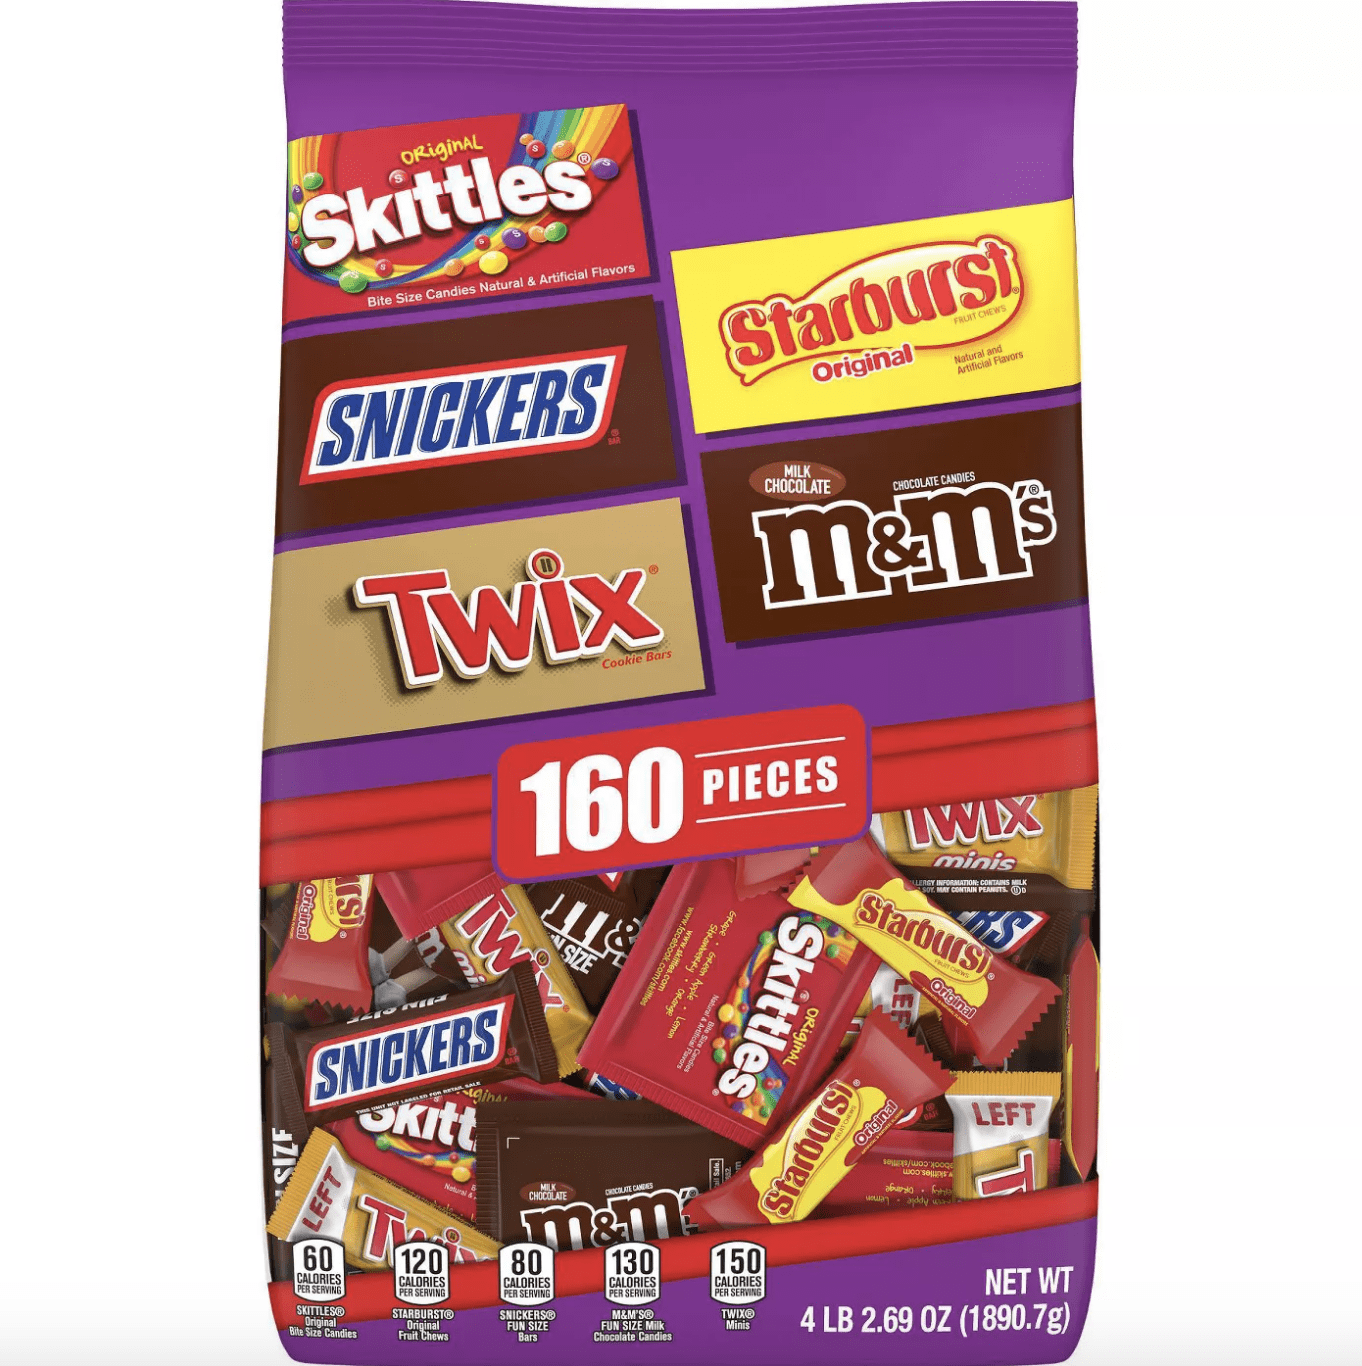 Where To Find The Lowest-Priced Halloween Candy